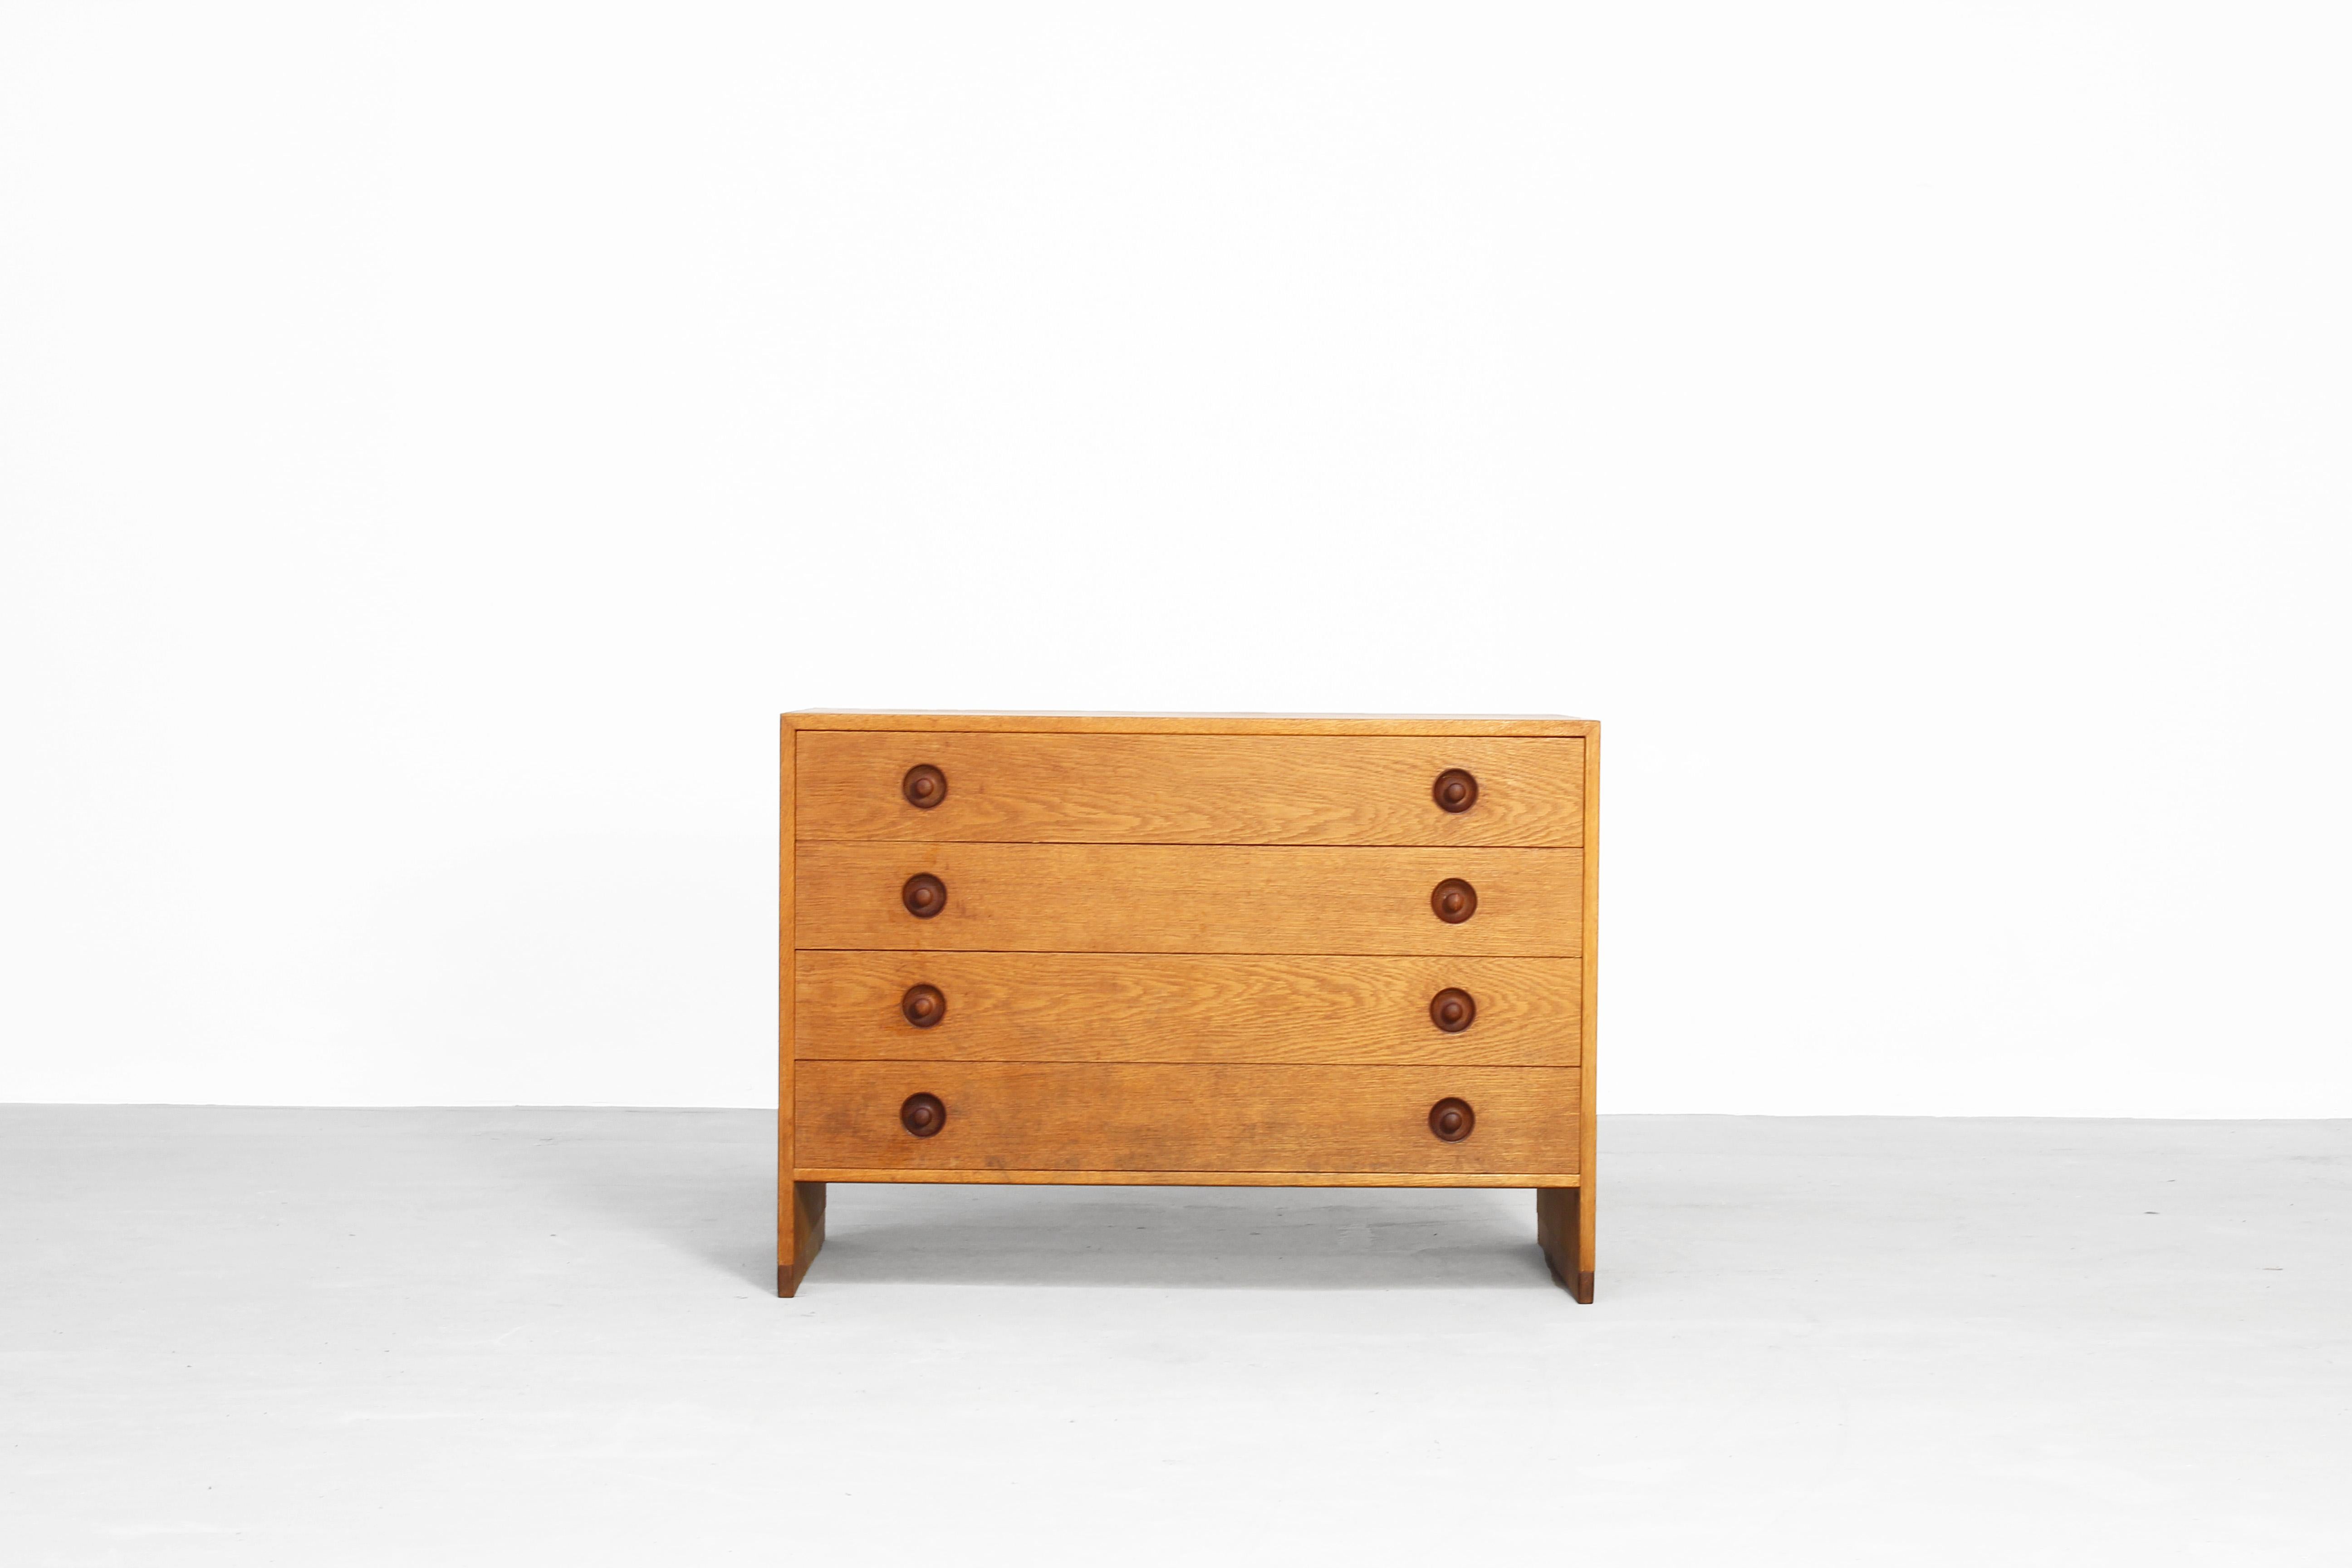 Beautiful chest of drawers by Hans J. Wegner for Ry Møbler , Denmark, 1960s.
This beautiful piece come with patinated oak in a very good condition.